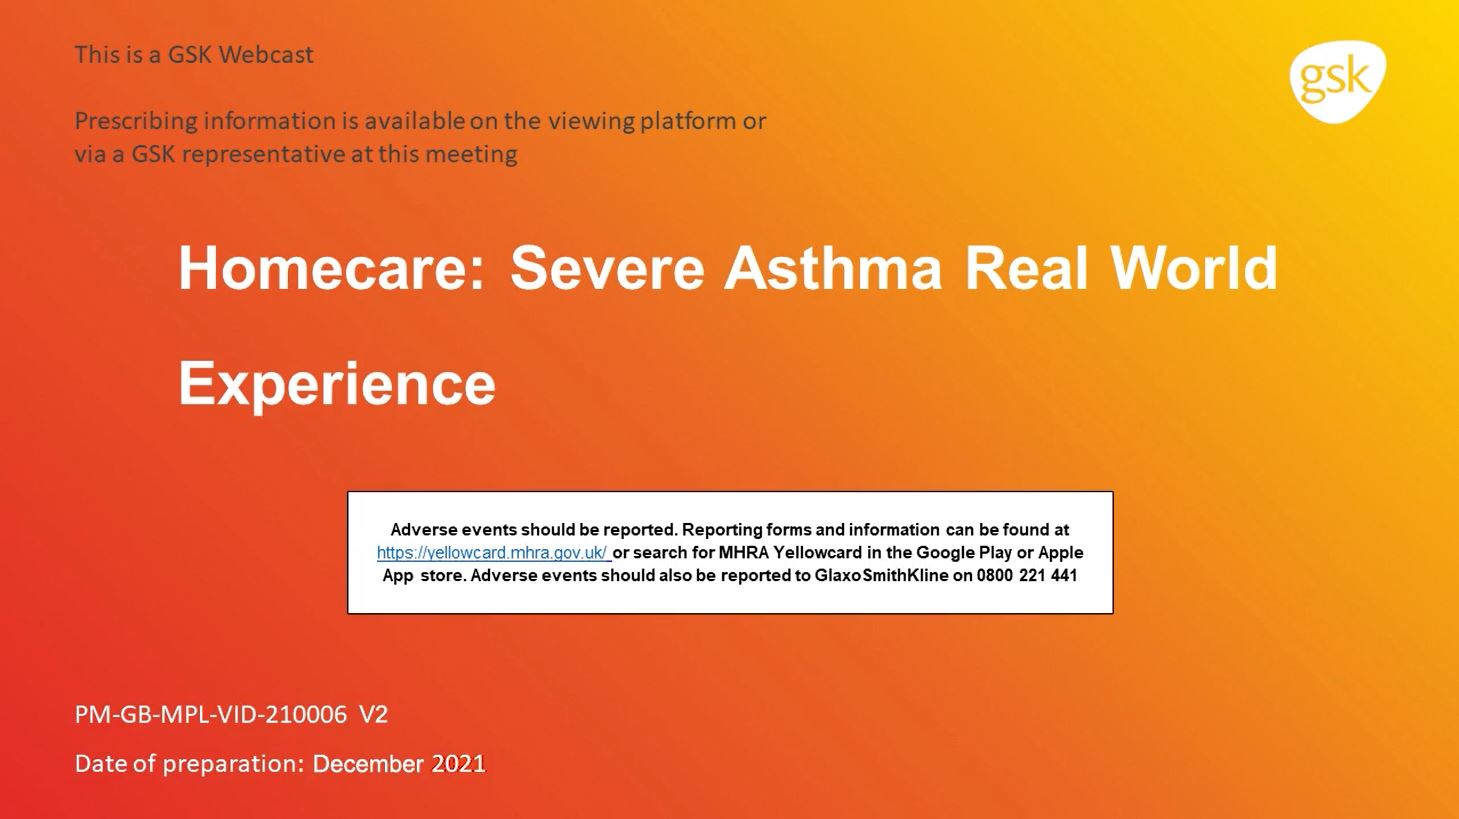 Homecare: Severe Asthma Real World Experience